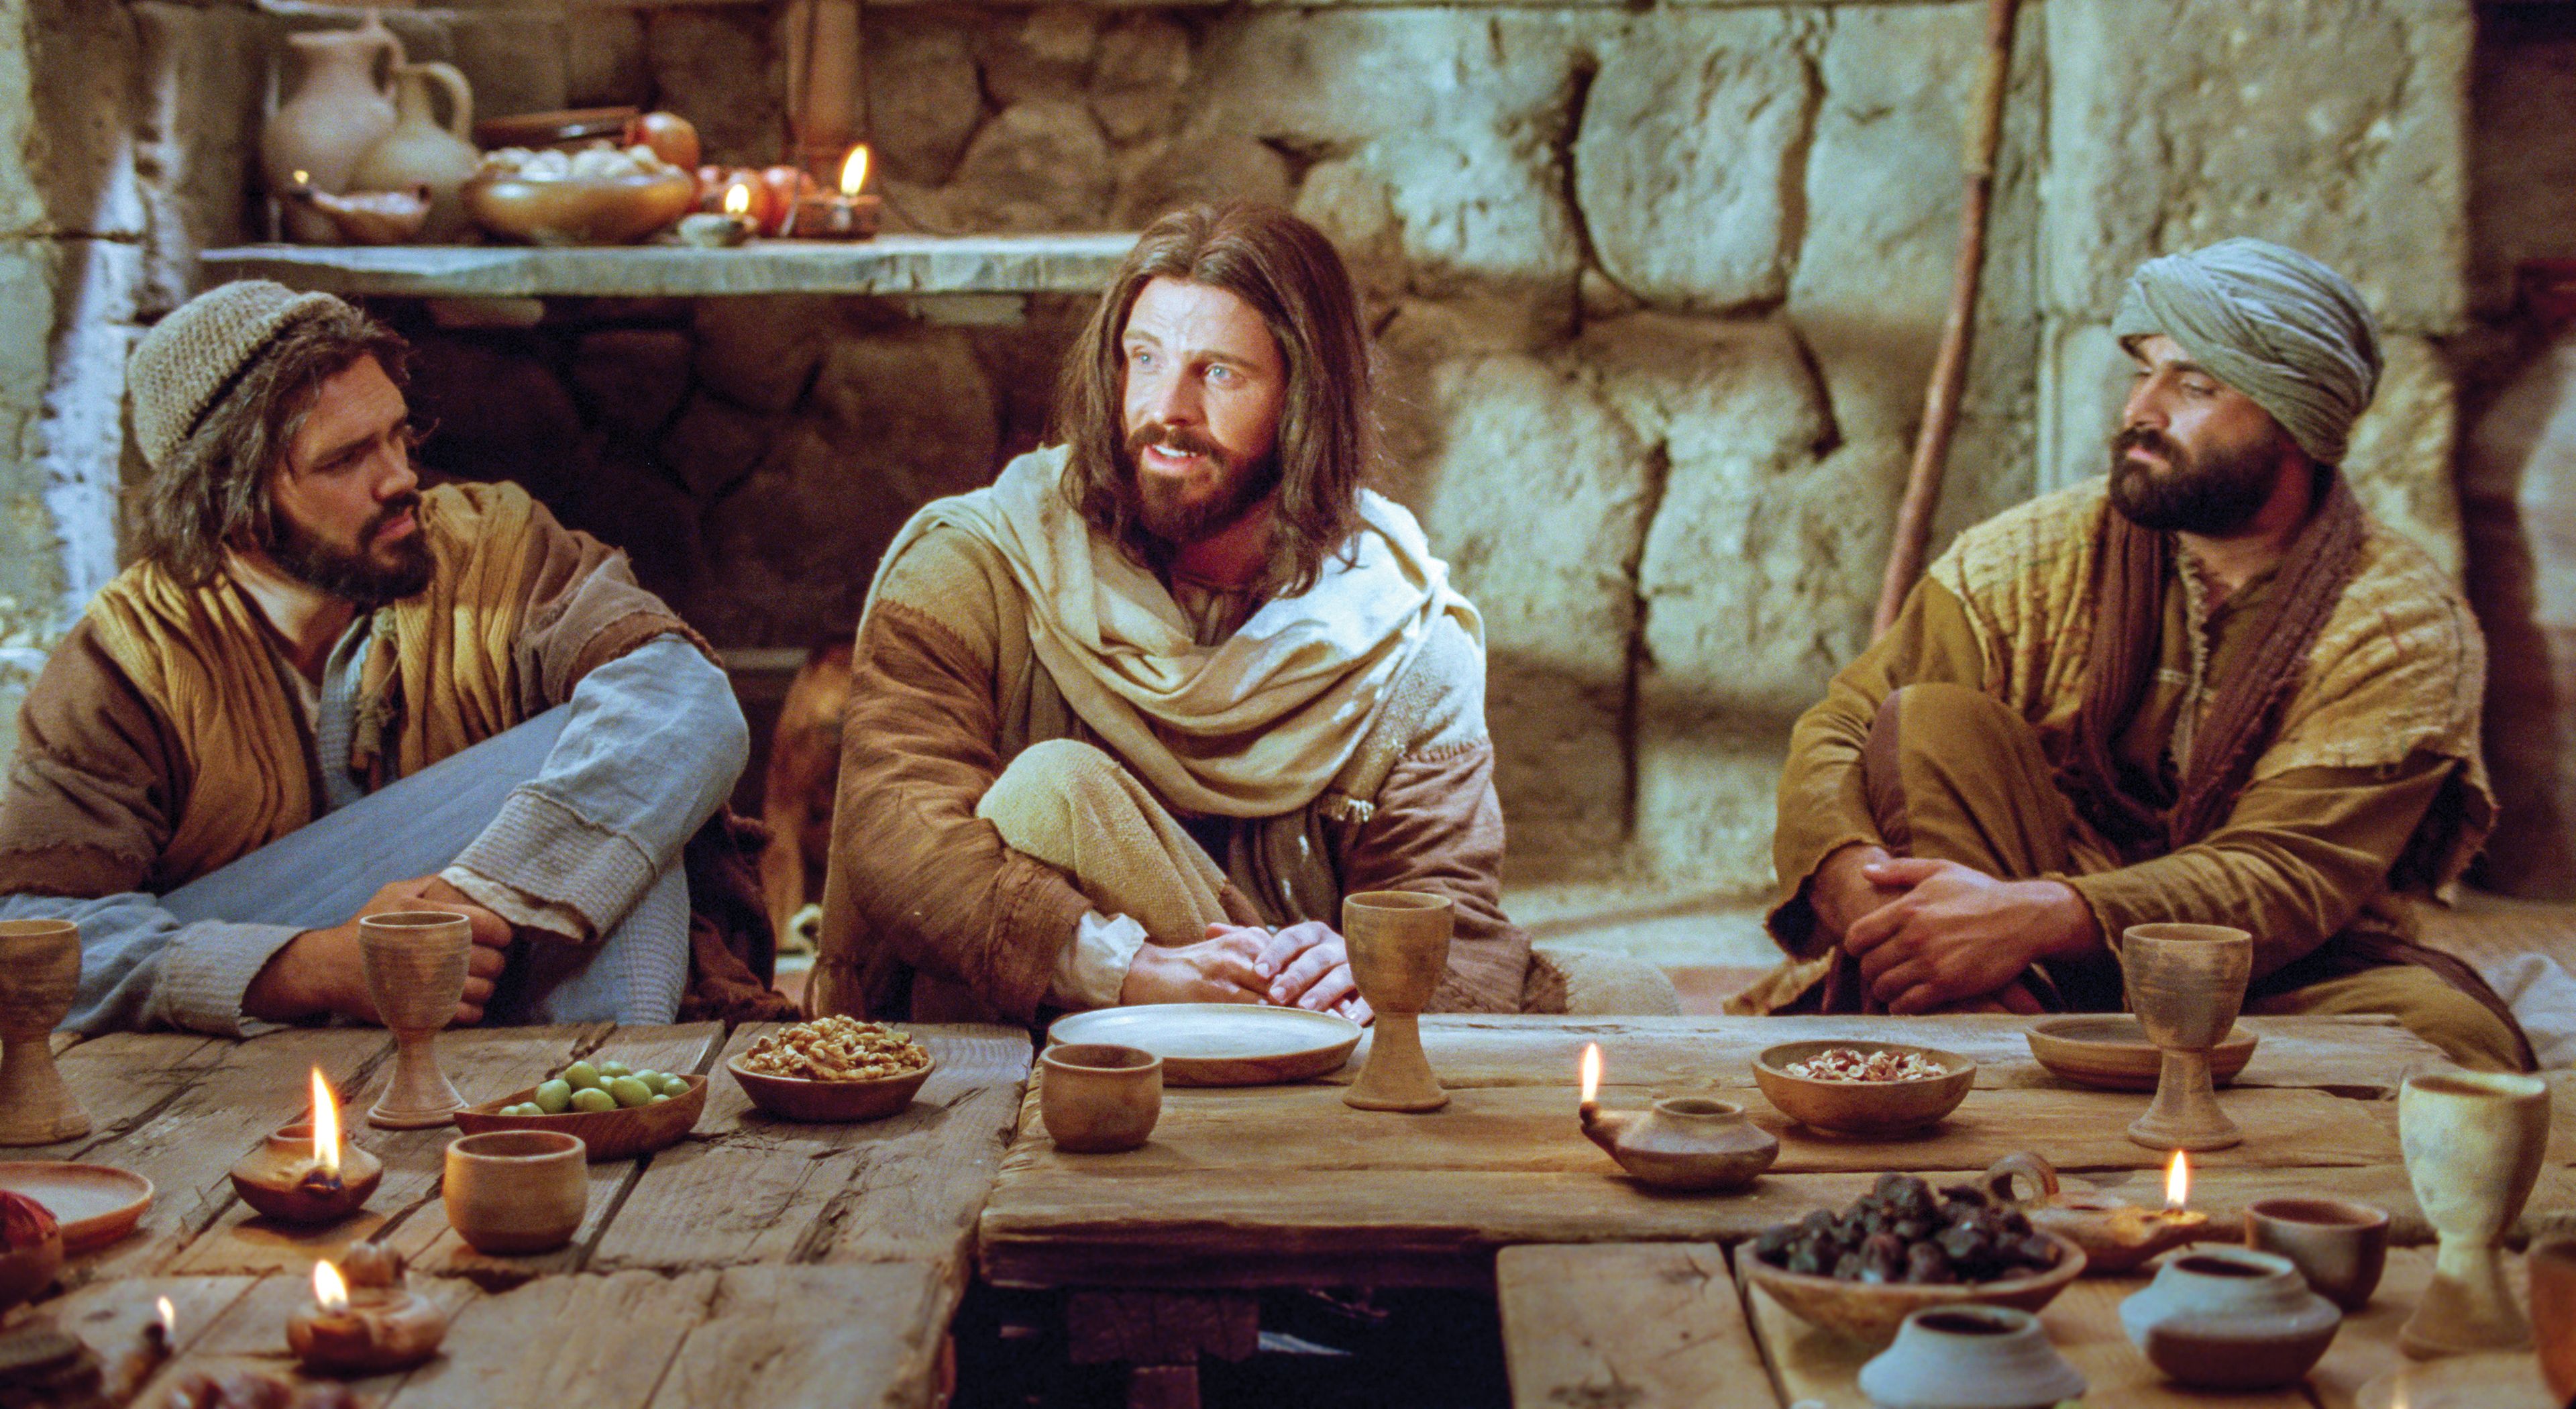 Jesus tells the story of the prodigal son, who took his inheritance and wasted it quickly in another country.